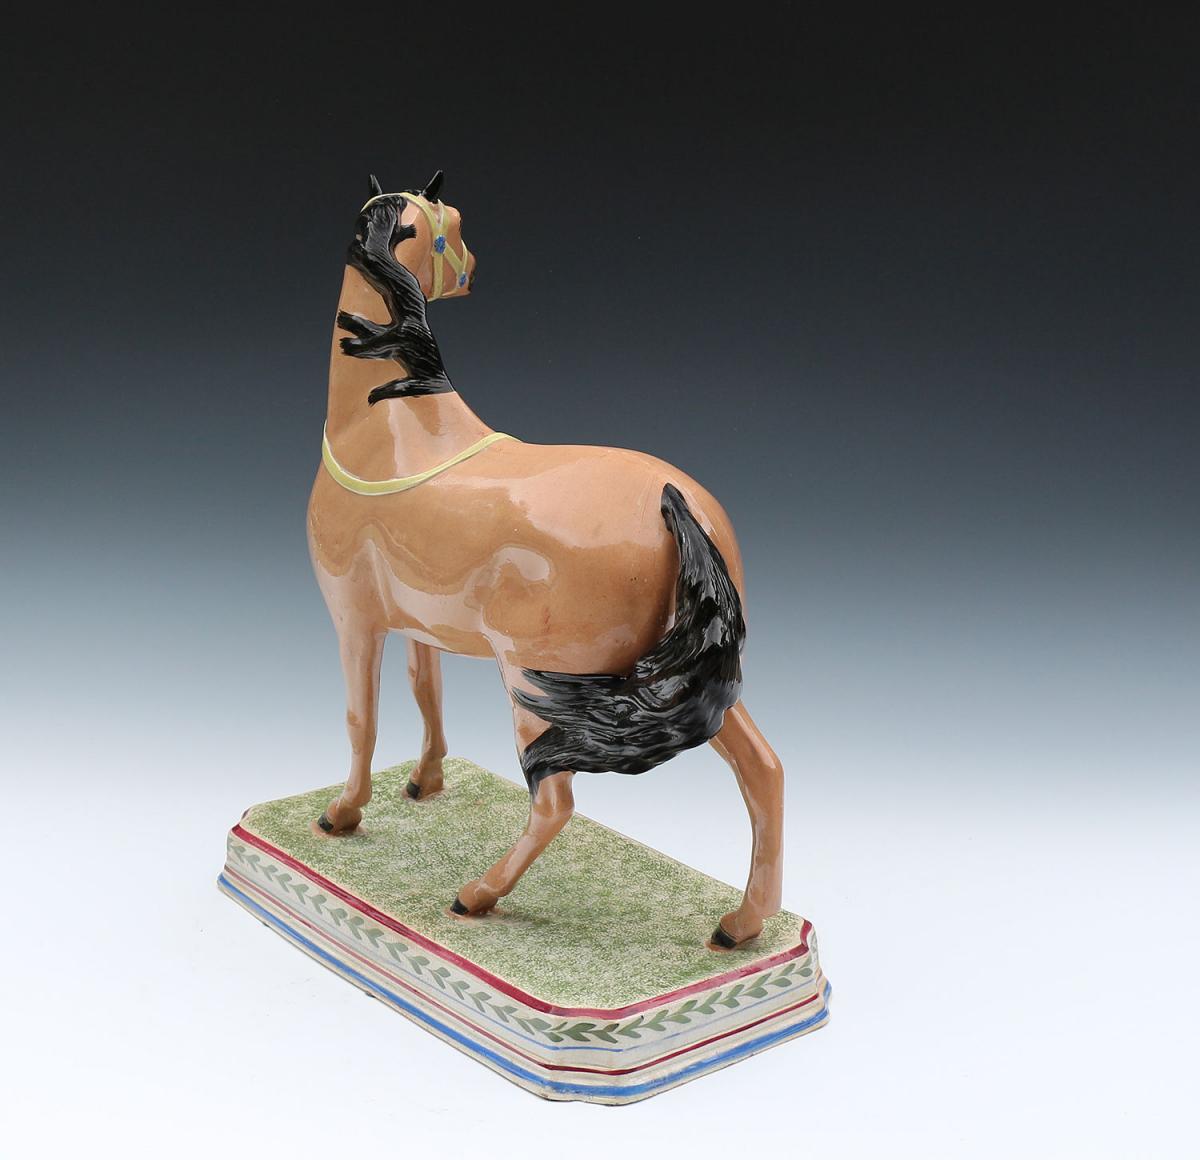 Antique pearlware pottery figure of a horse attributed to the Leeds Pottery early 19th century